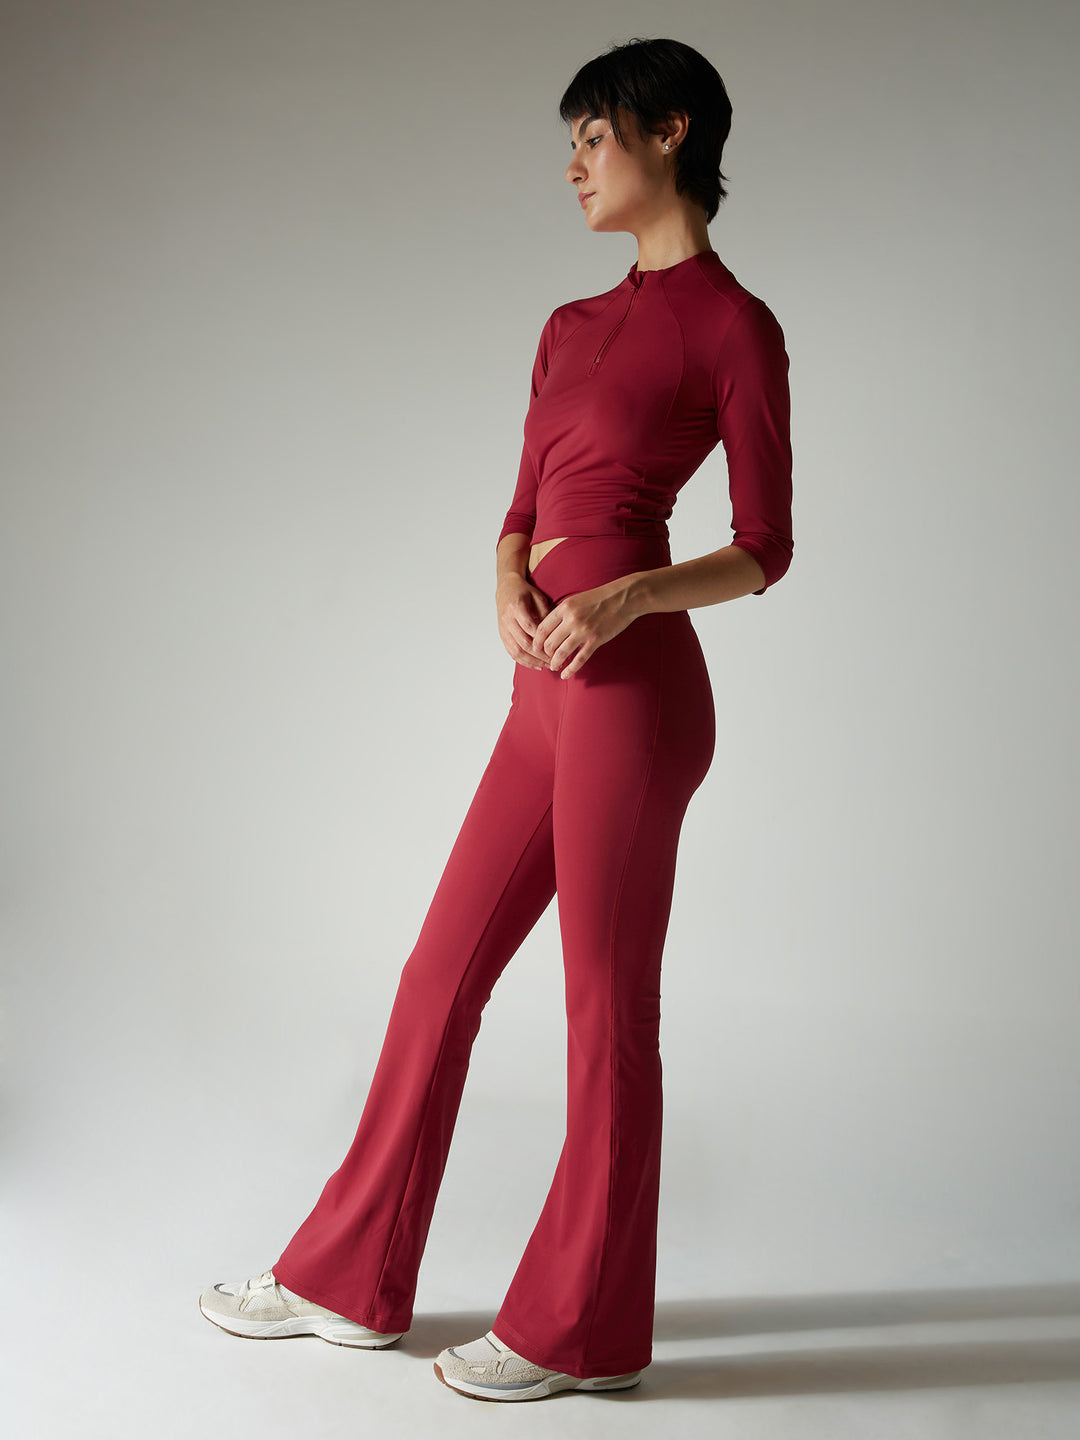 Sienna Red Tall Hourglass Leggings